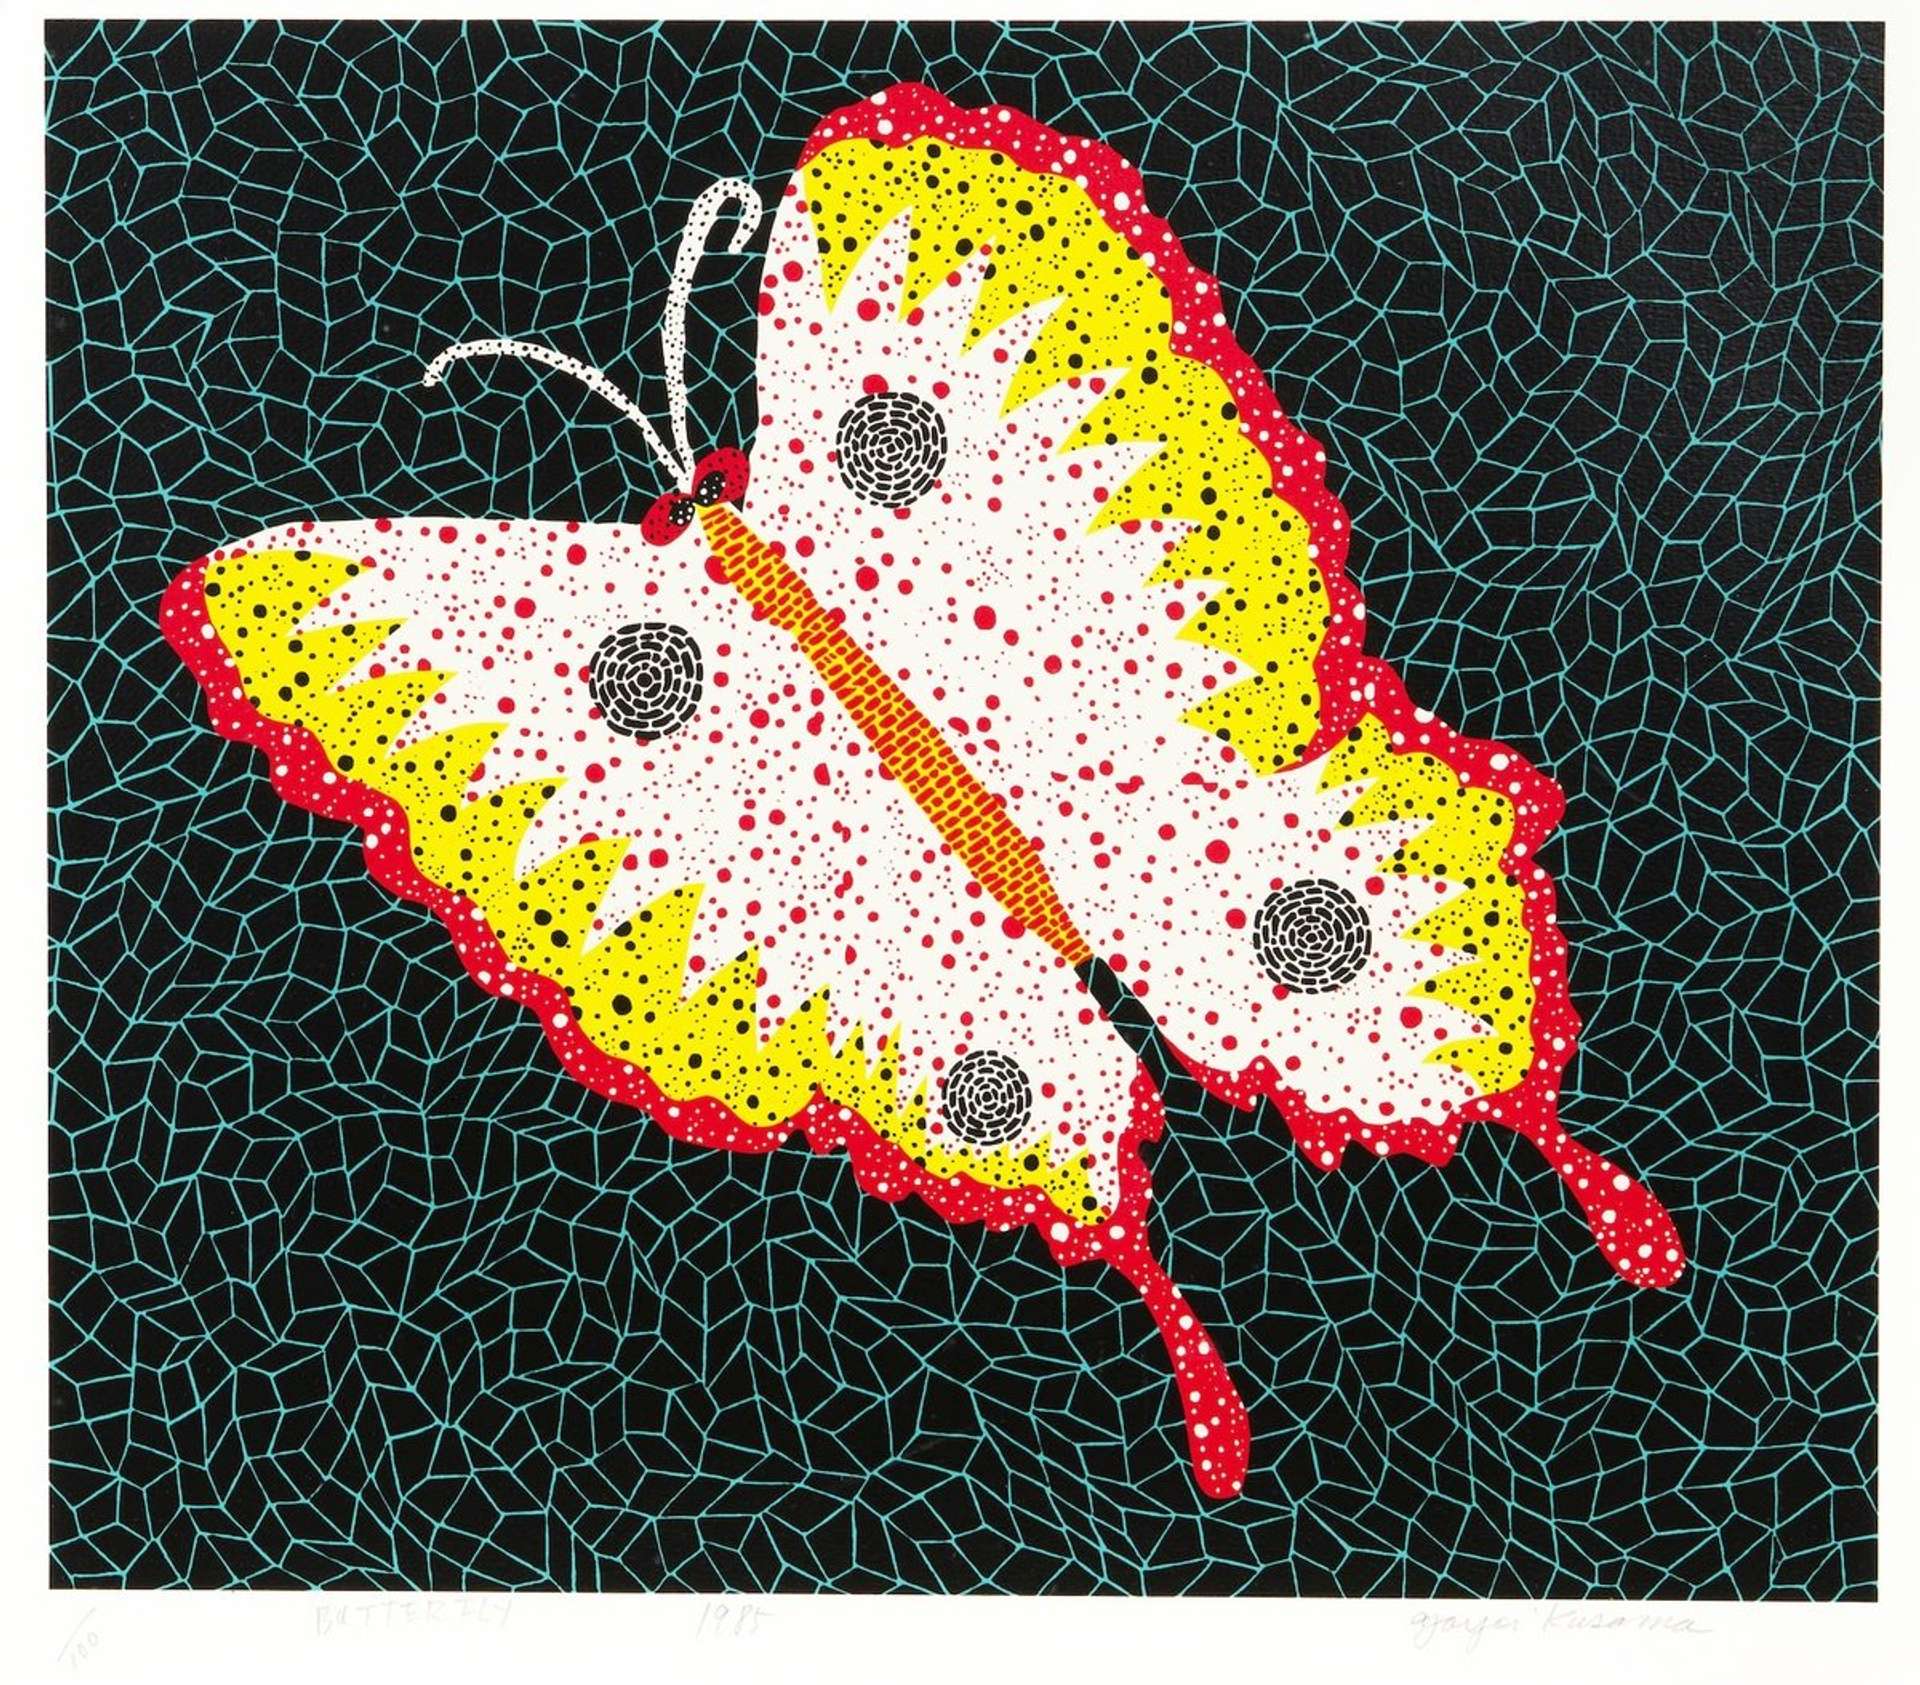 Yayoi Kusama’s Butterfly, Kusama 81. A screenprint of a white, red, and yellow butterfly designed with a pattern of dots against a dark background.